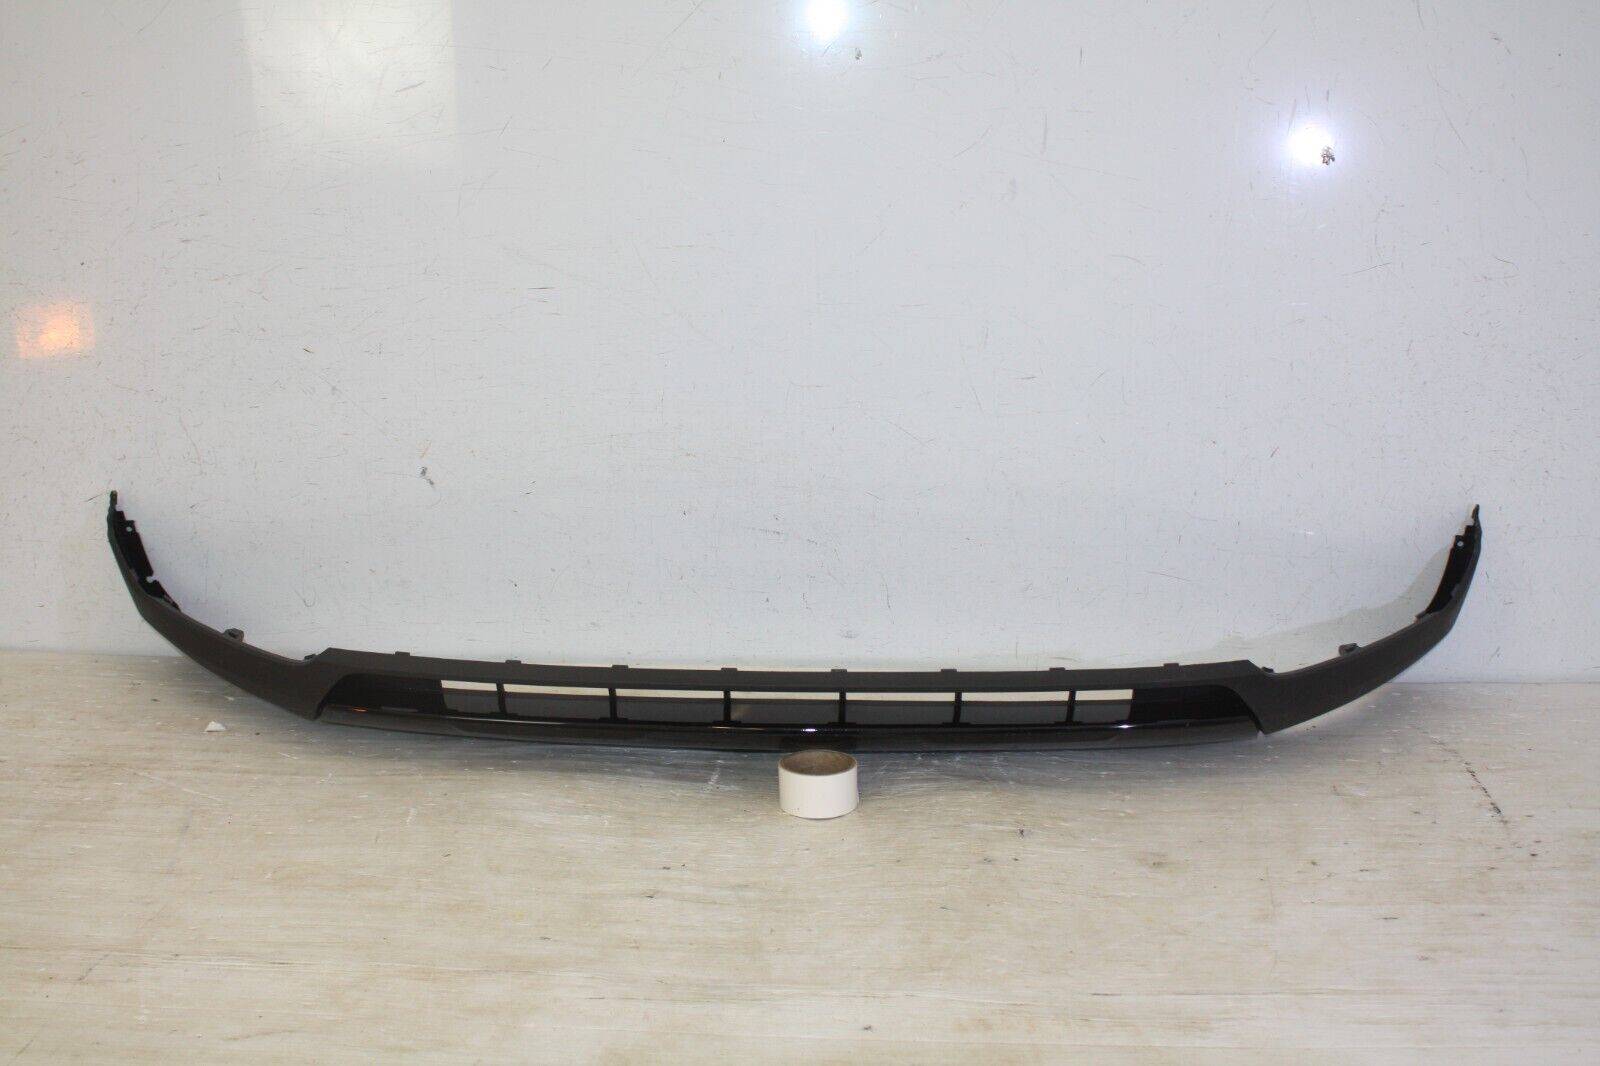 Volvo XC40 Front Bumper Lower Section 2018 ON 31449340 Genuine 176110122992